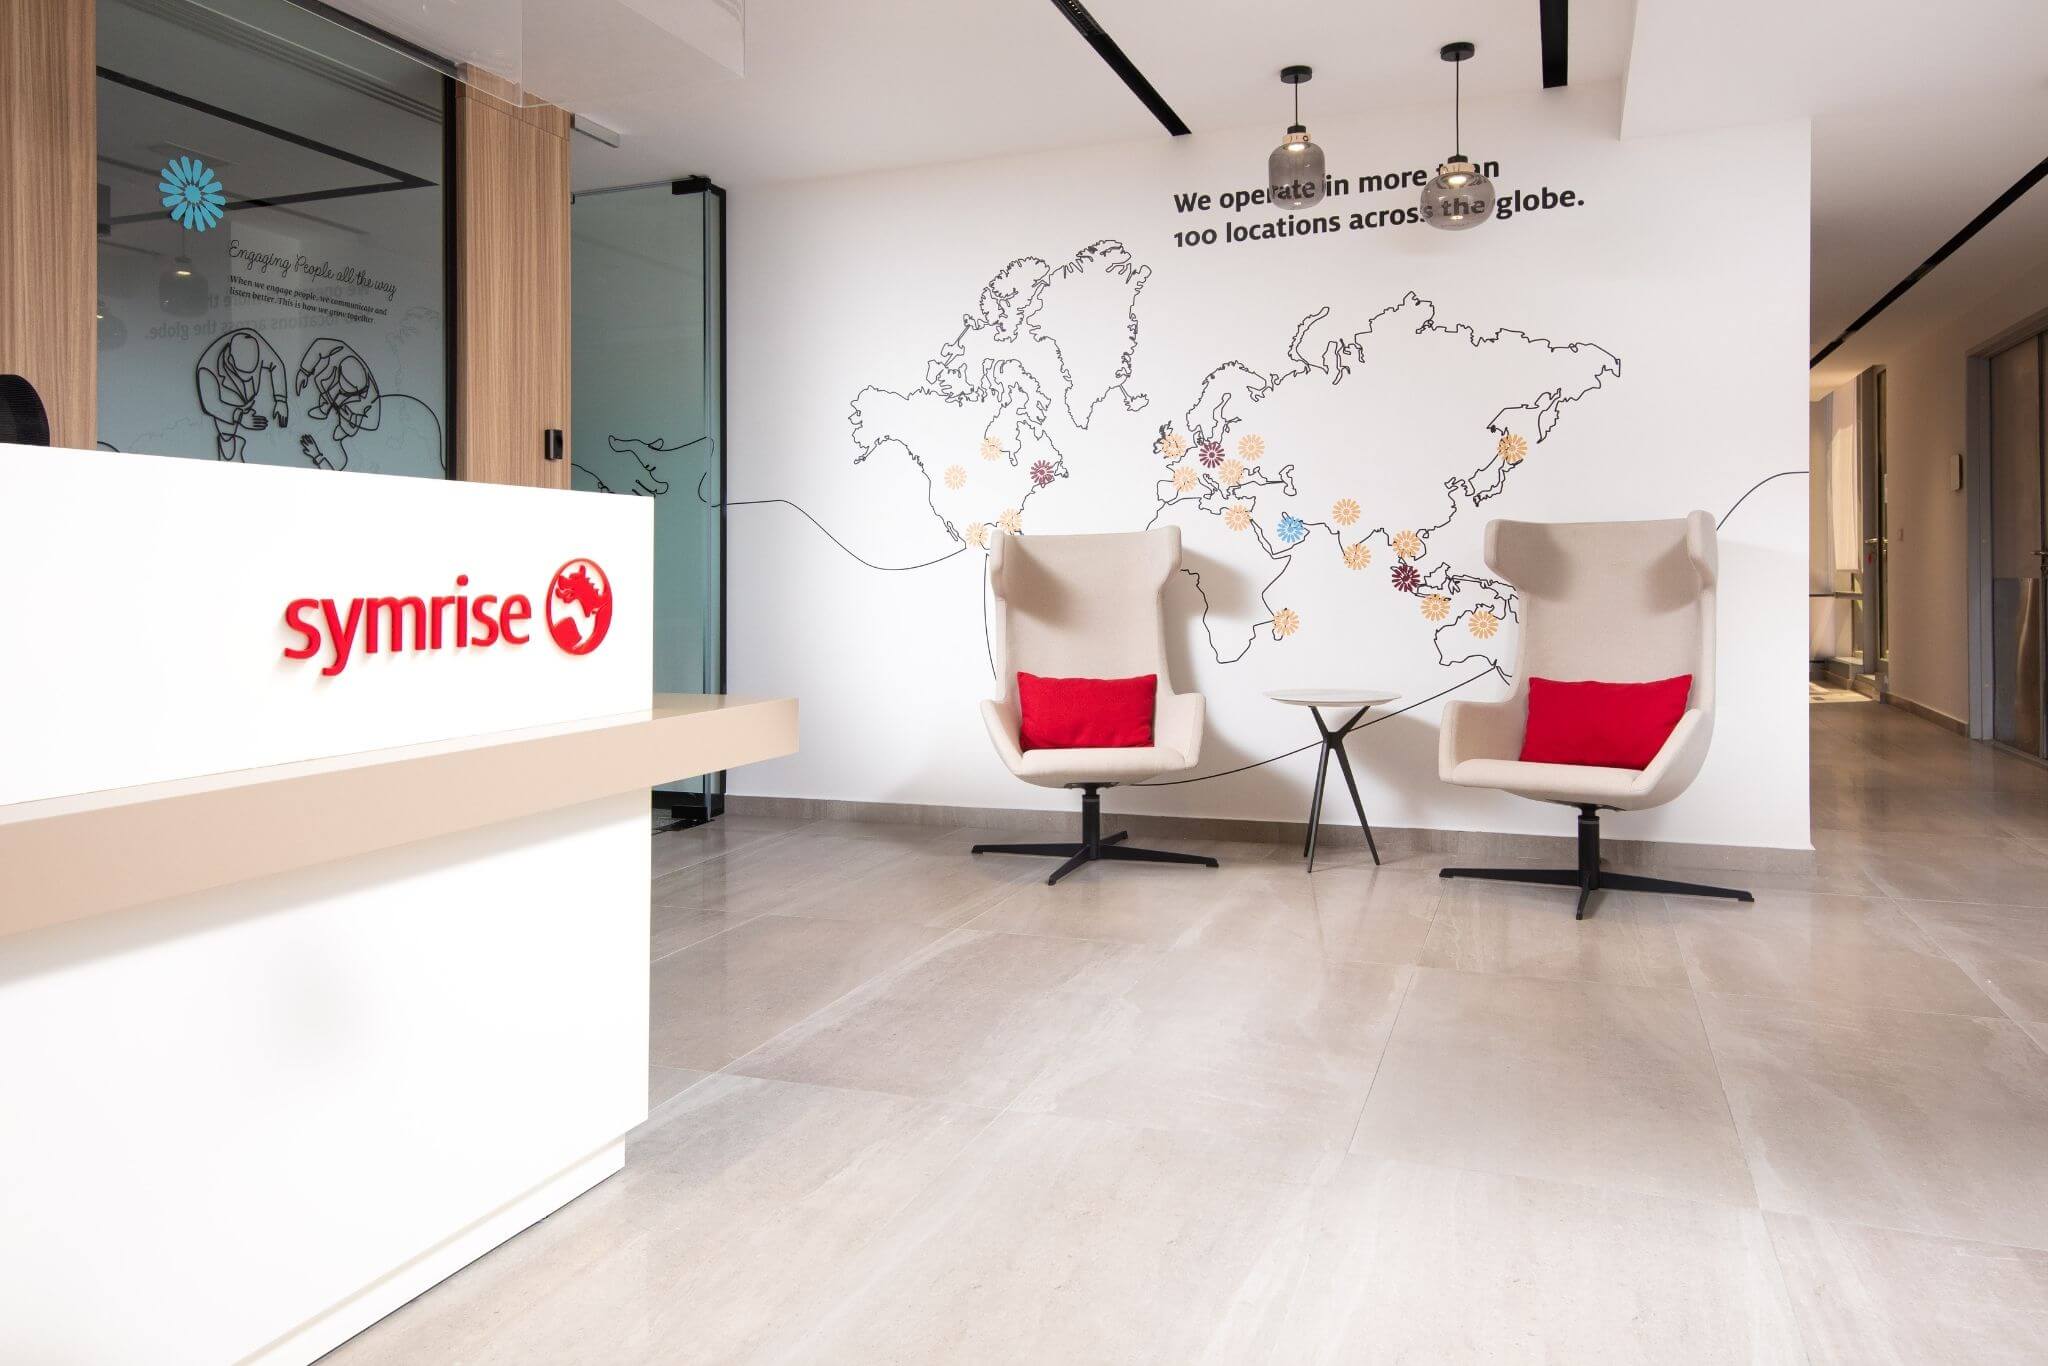 Symrise office in JLT Dubai design and fit out by Motif Interiors0